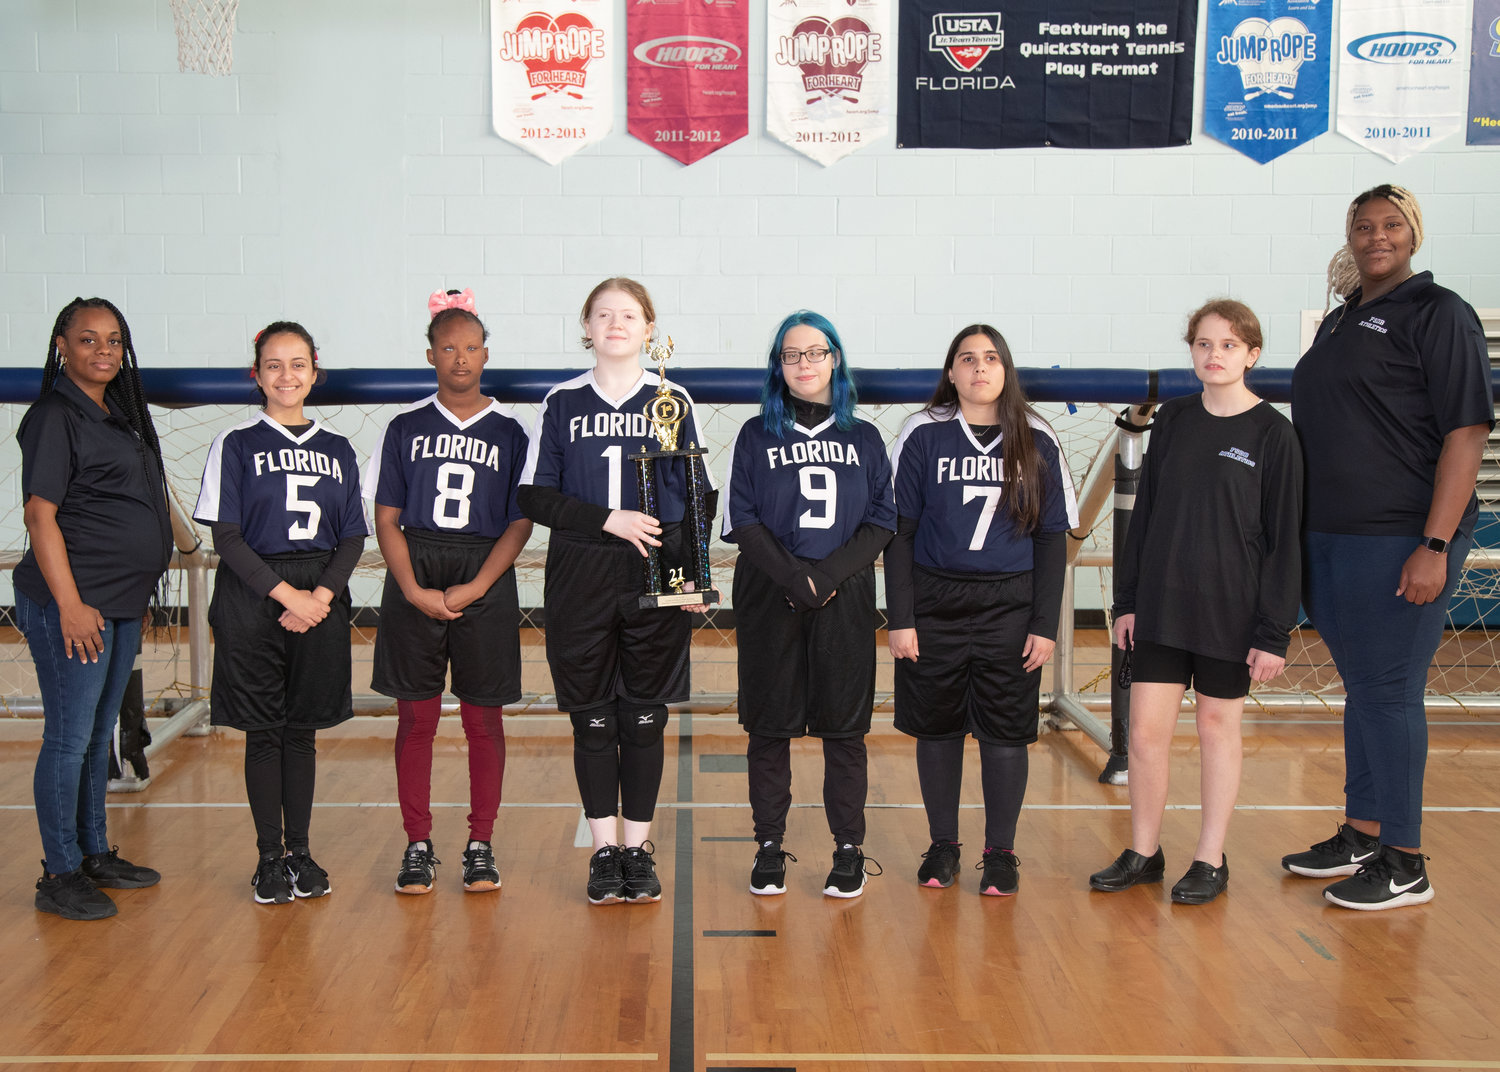 The members of the FSDB girls goalball team showed everyone that they are champions after winning first place at the Youth Nationals this year.